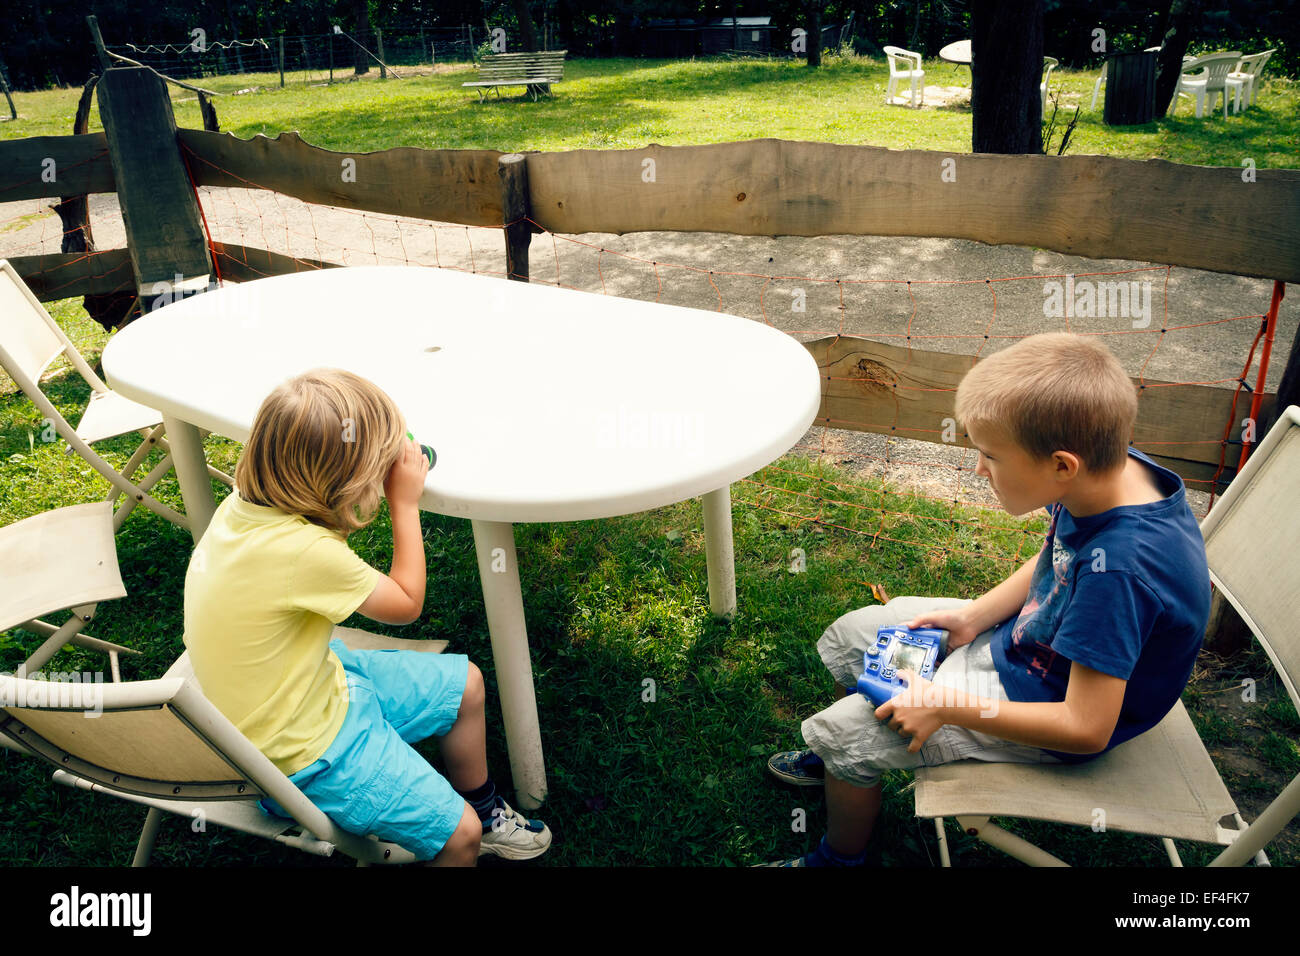 Two young boys outdoors at a park. Stock Photo